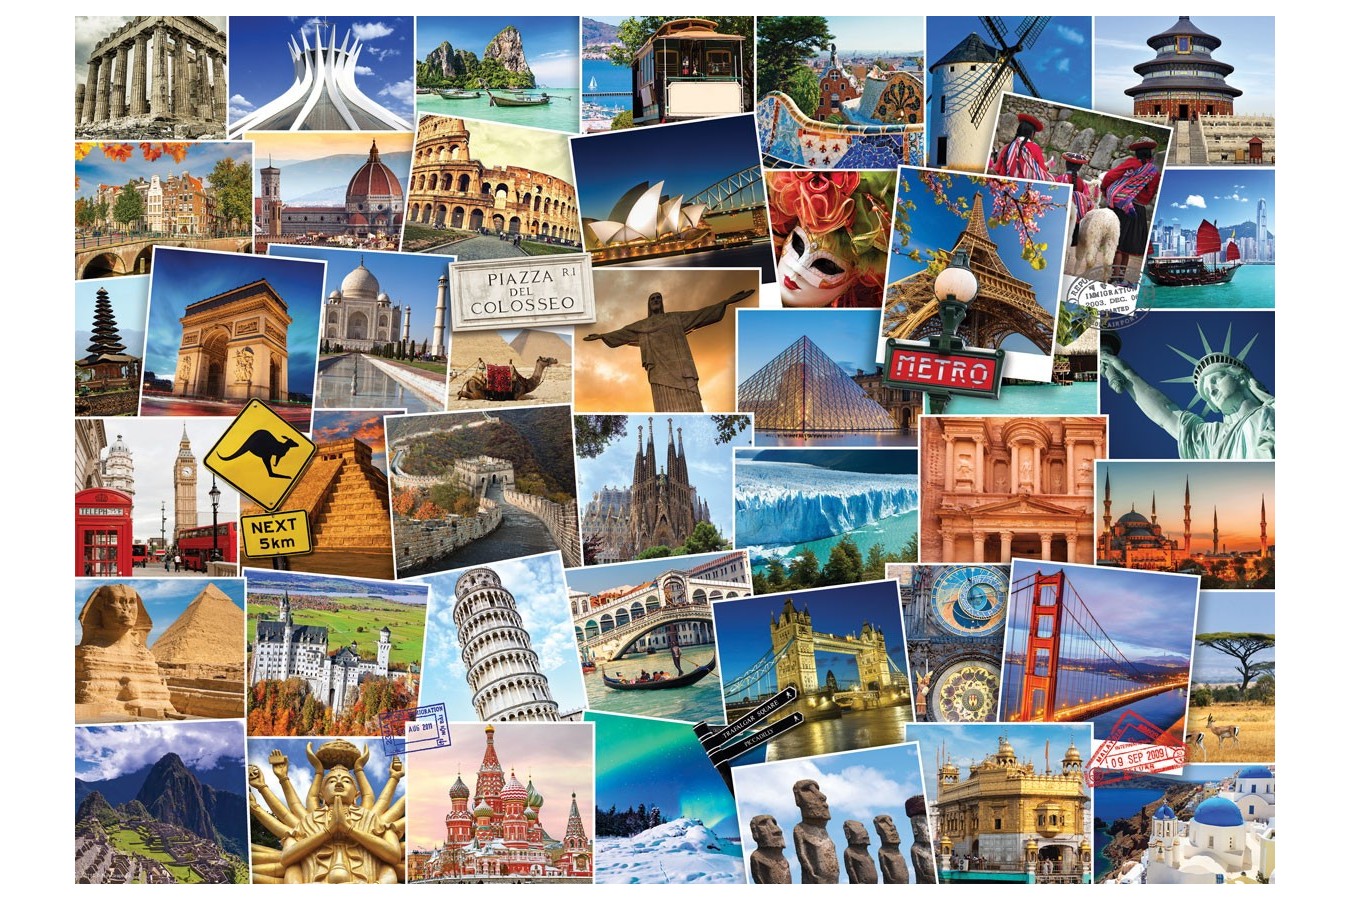 Puzzle Eurographics - World Globetrotter, 1000 piese (6000-0751)